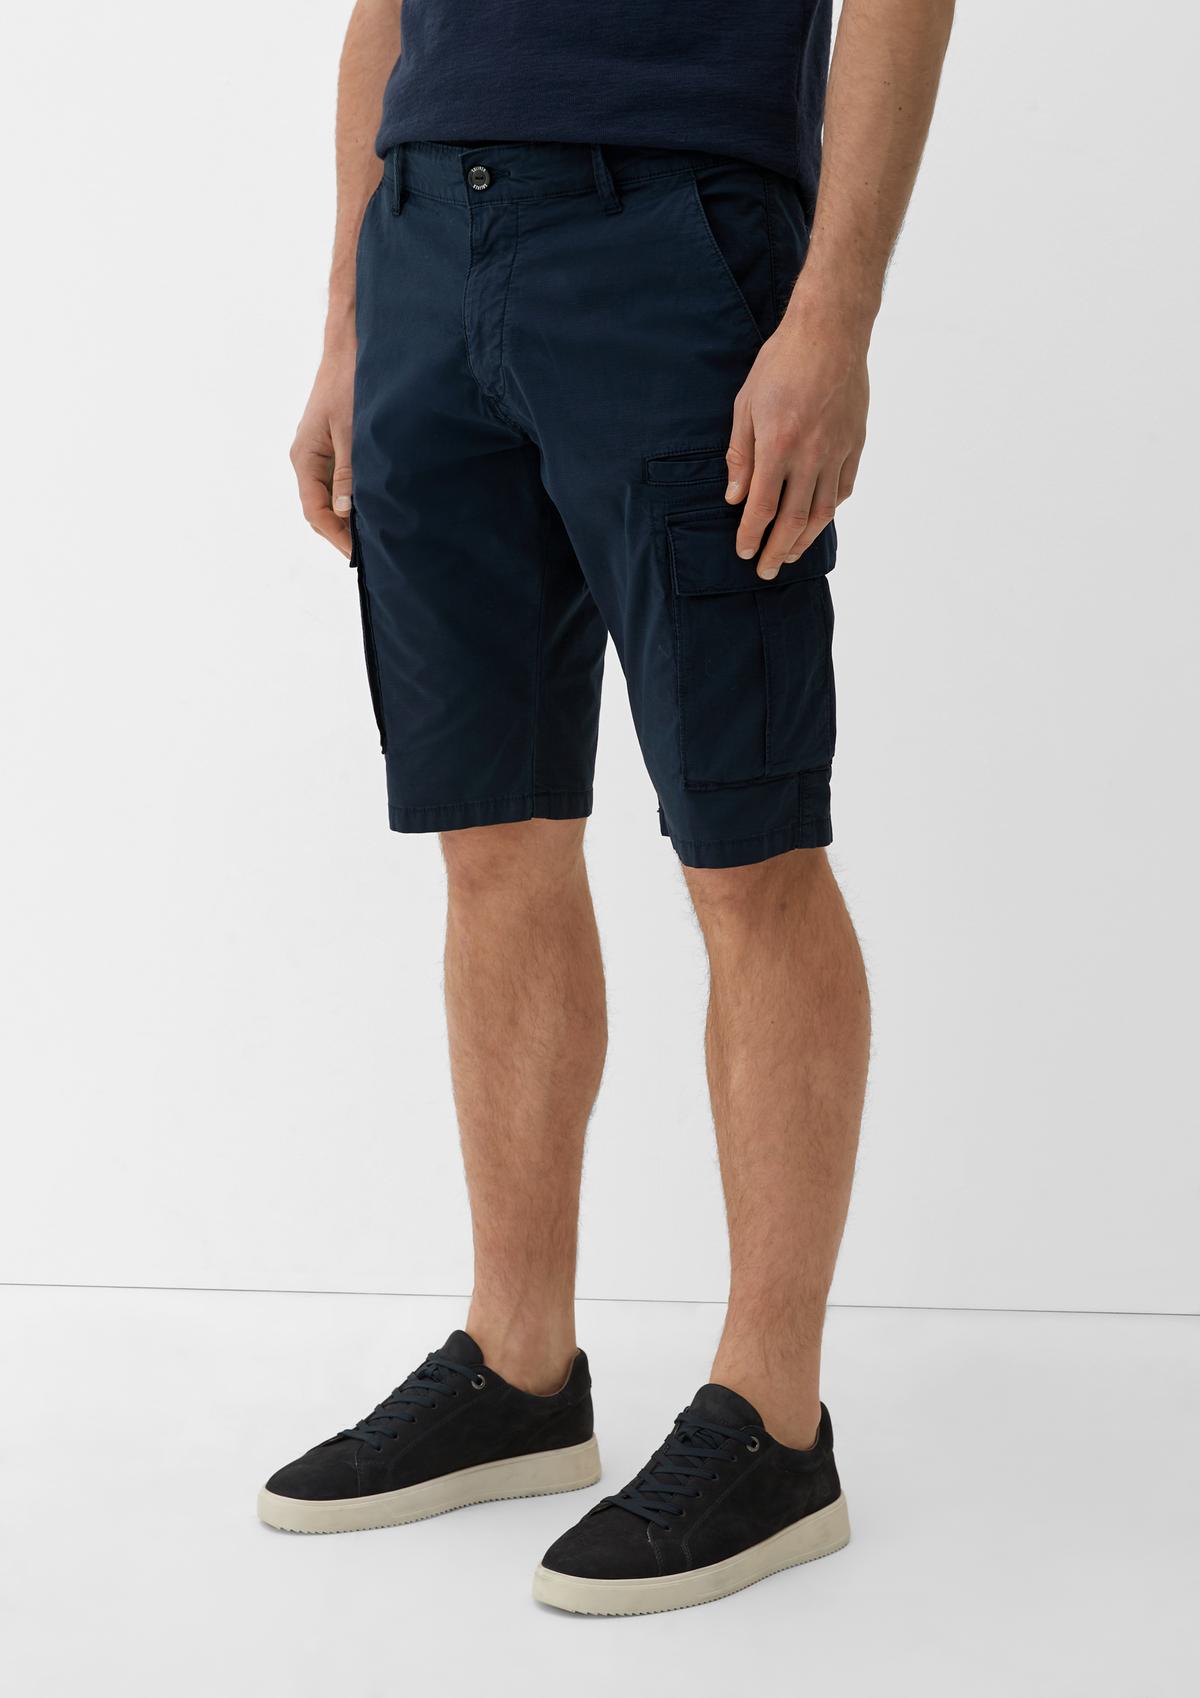 rose Bermuda fit: Relaxed with shorts - drawstring